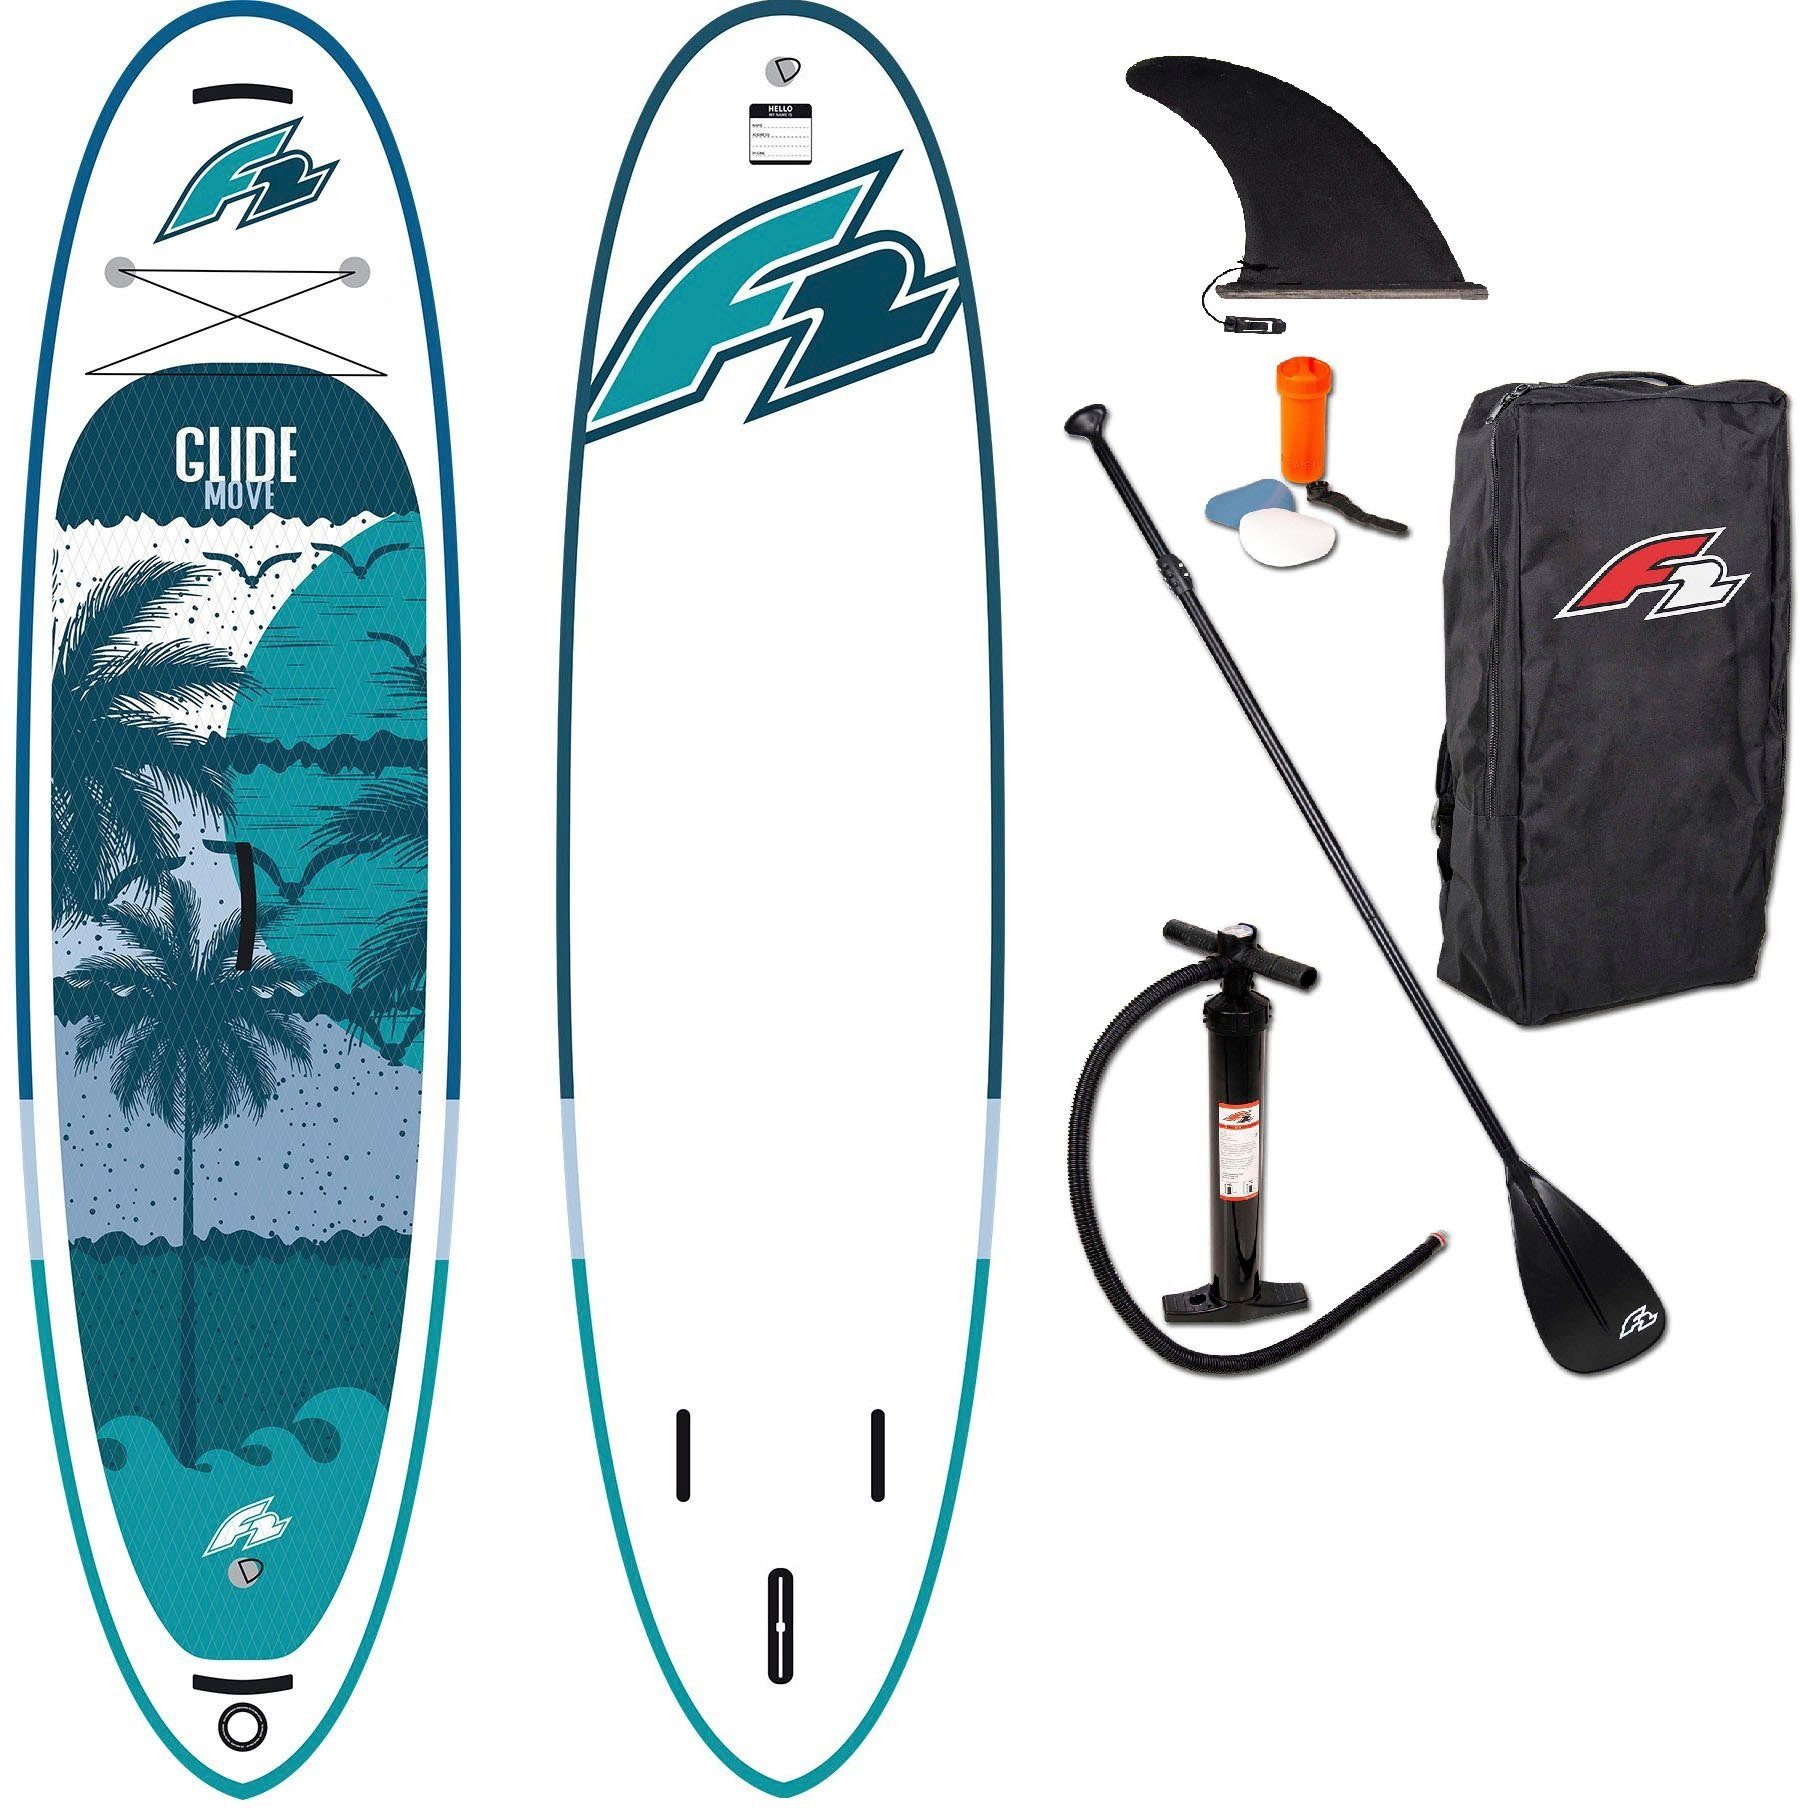 F2 Inflatable SUP-Board Glide Move, tlg) 5 (Packung